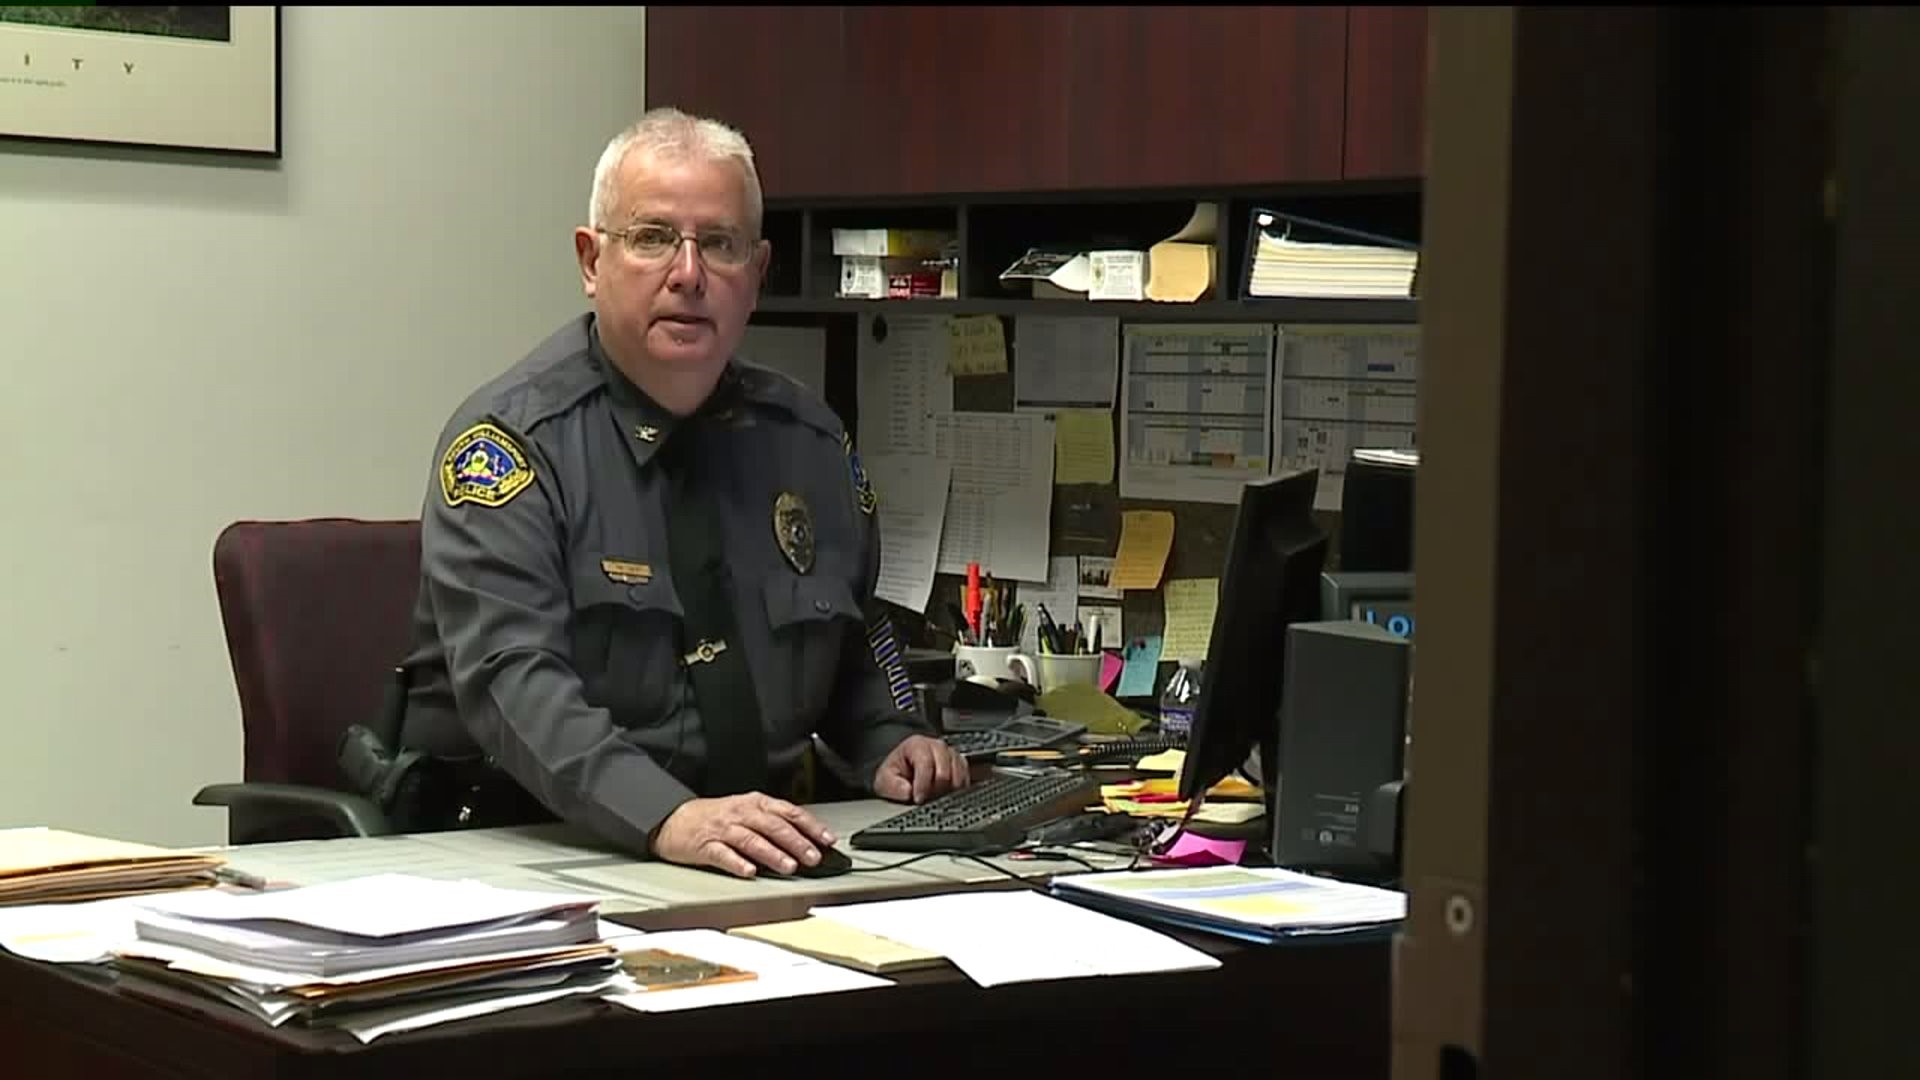 South Williamsport Police Chief Ready to Retire